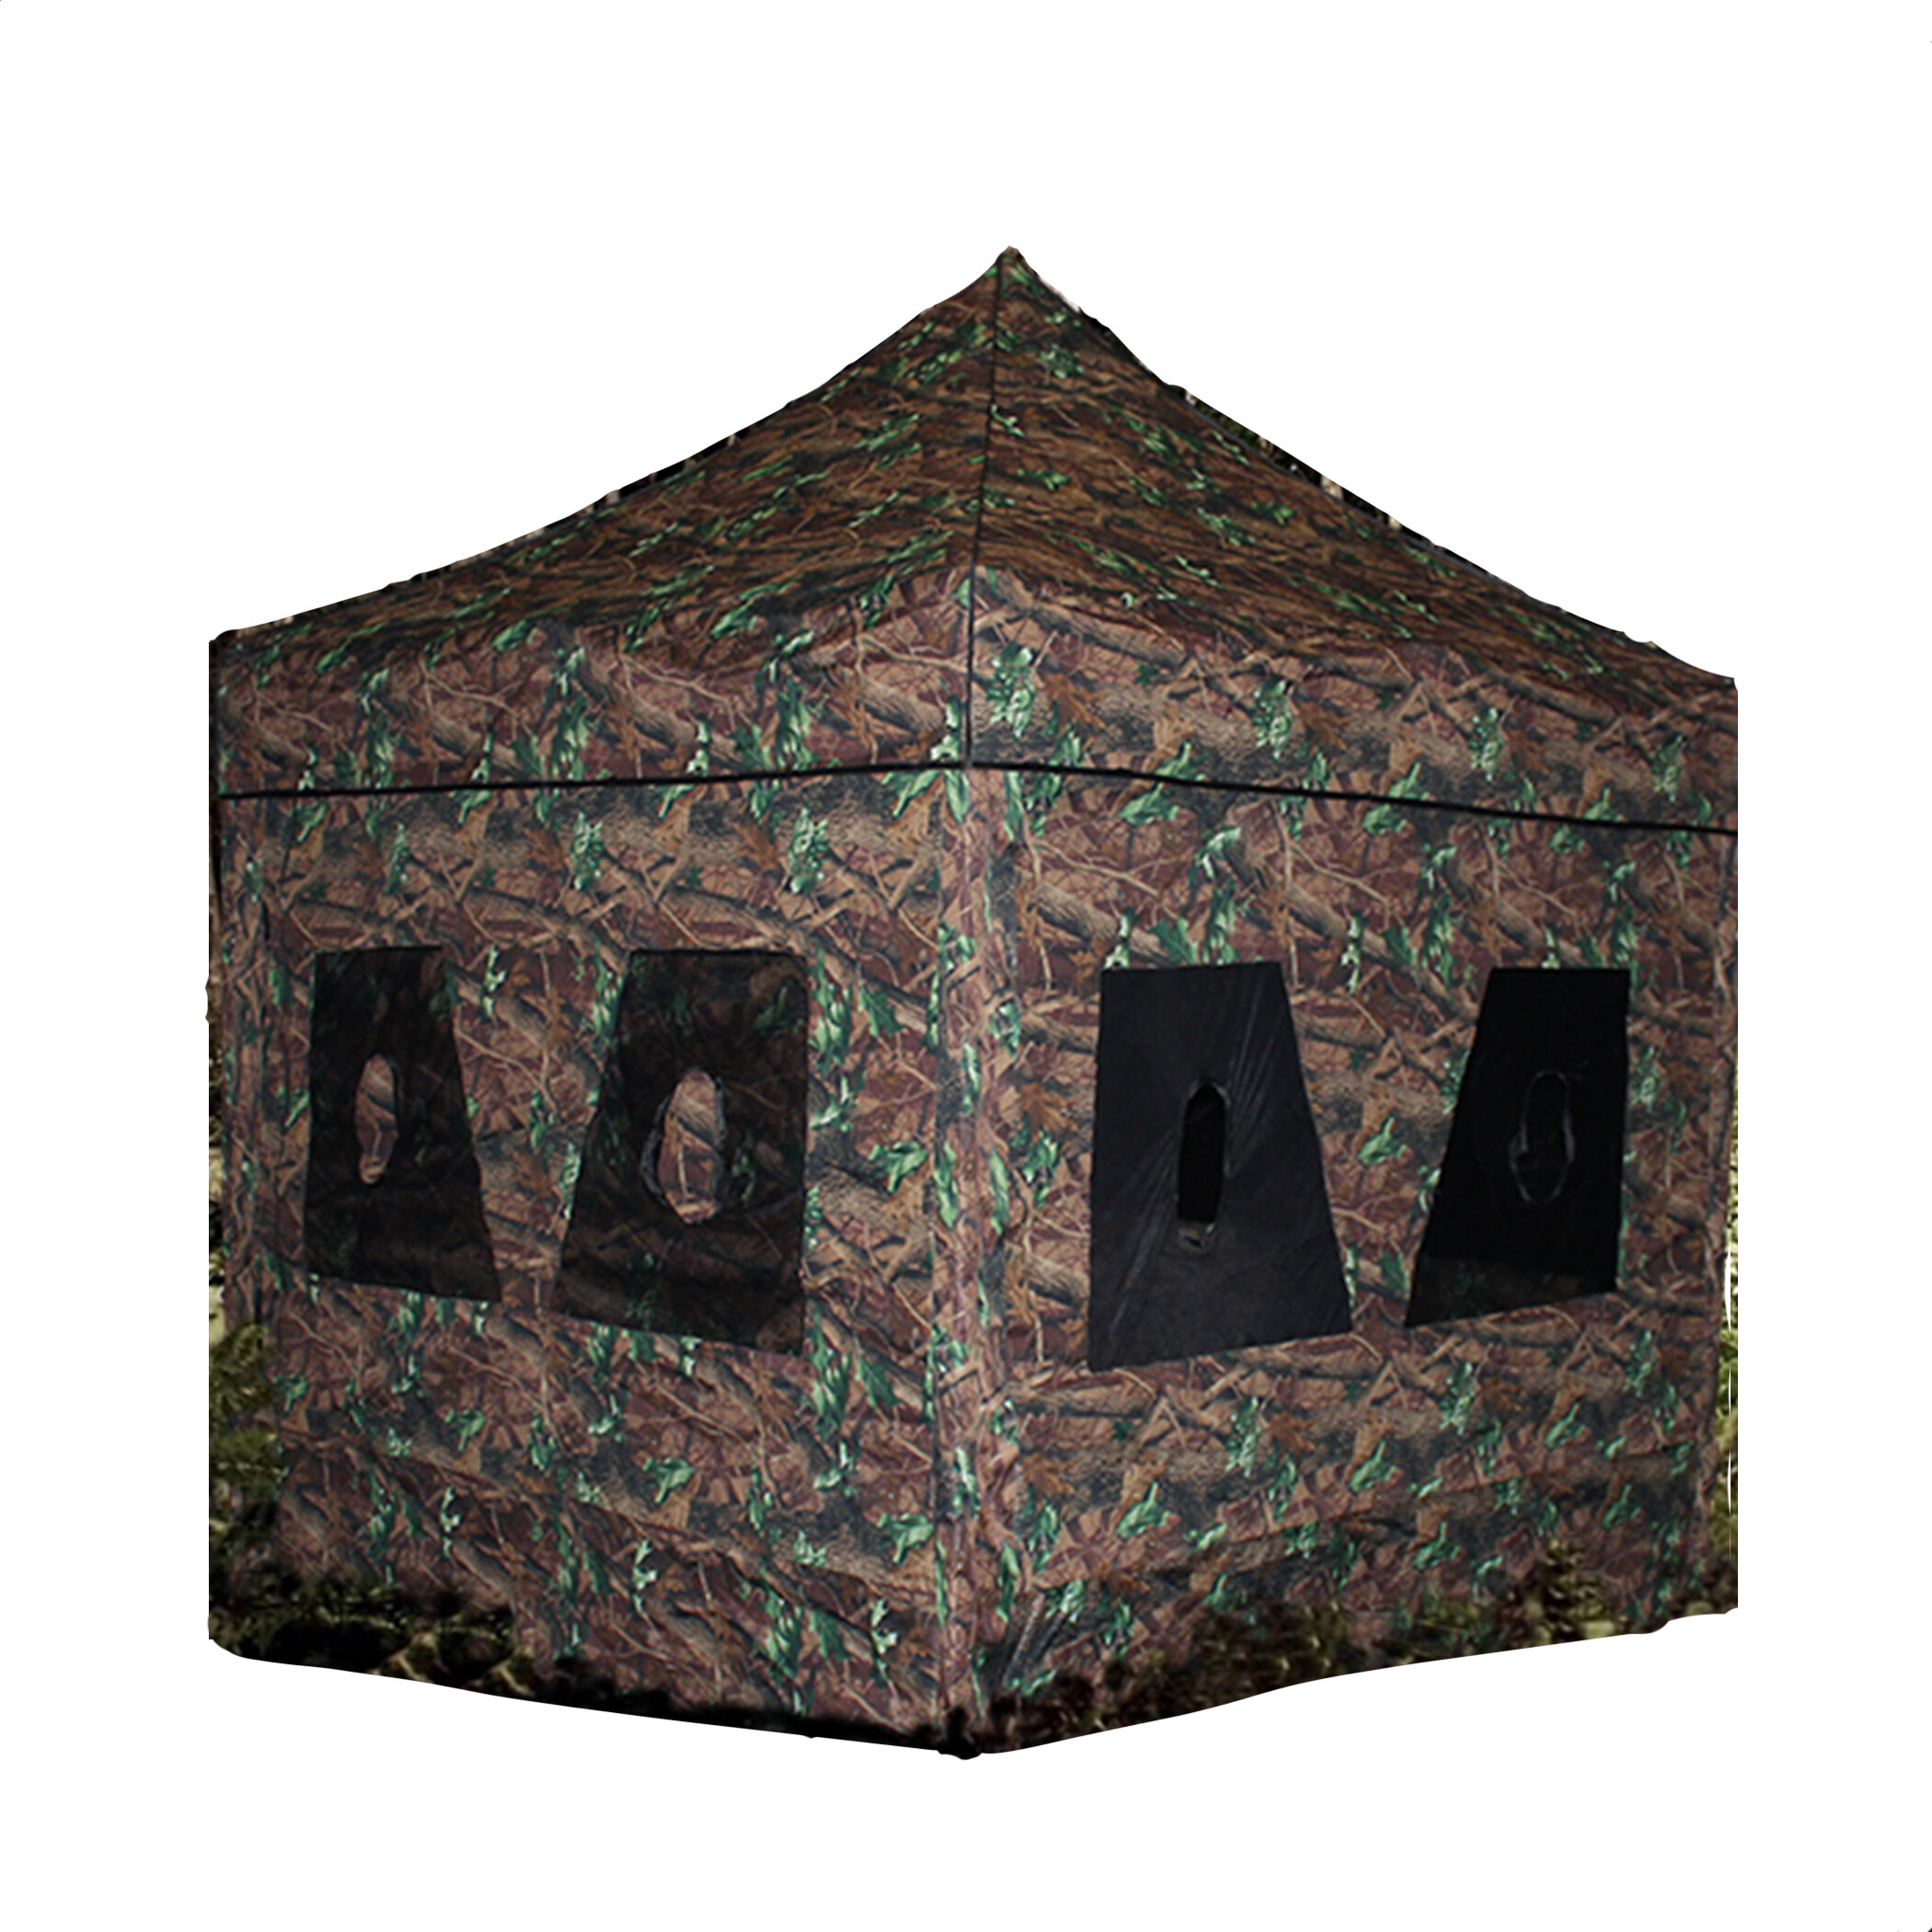 Details about   Waterproof Hunting Pop-up Tent 2-3 Person Mesh Window Ground Blind Camo Green 